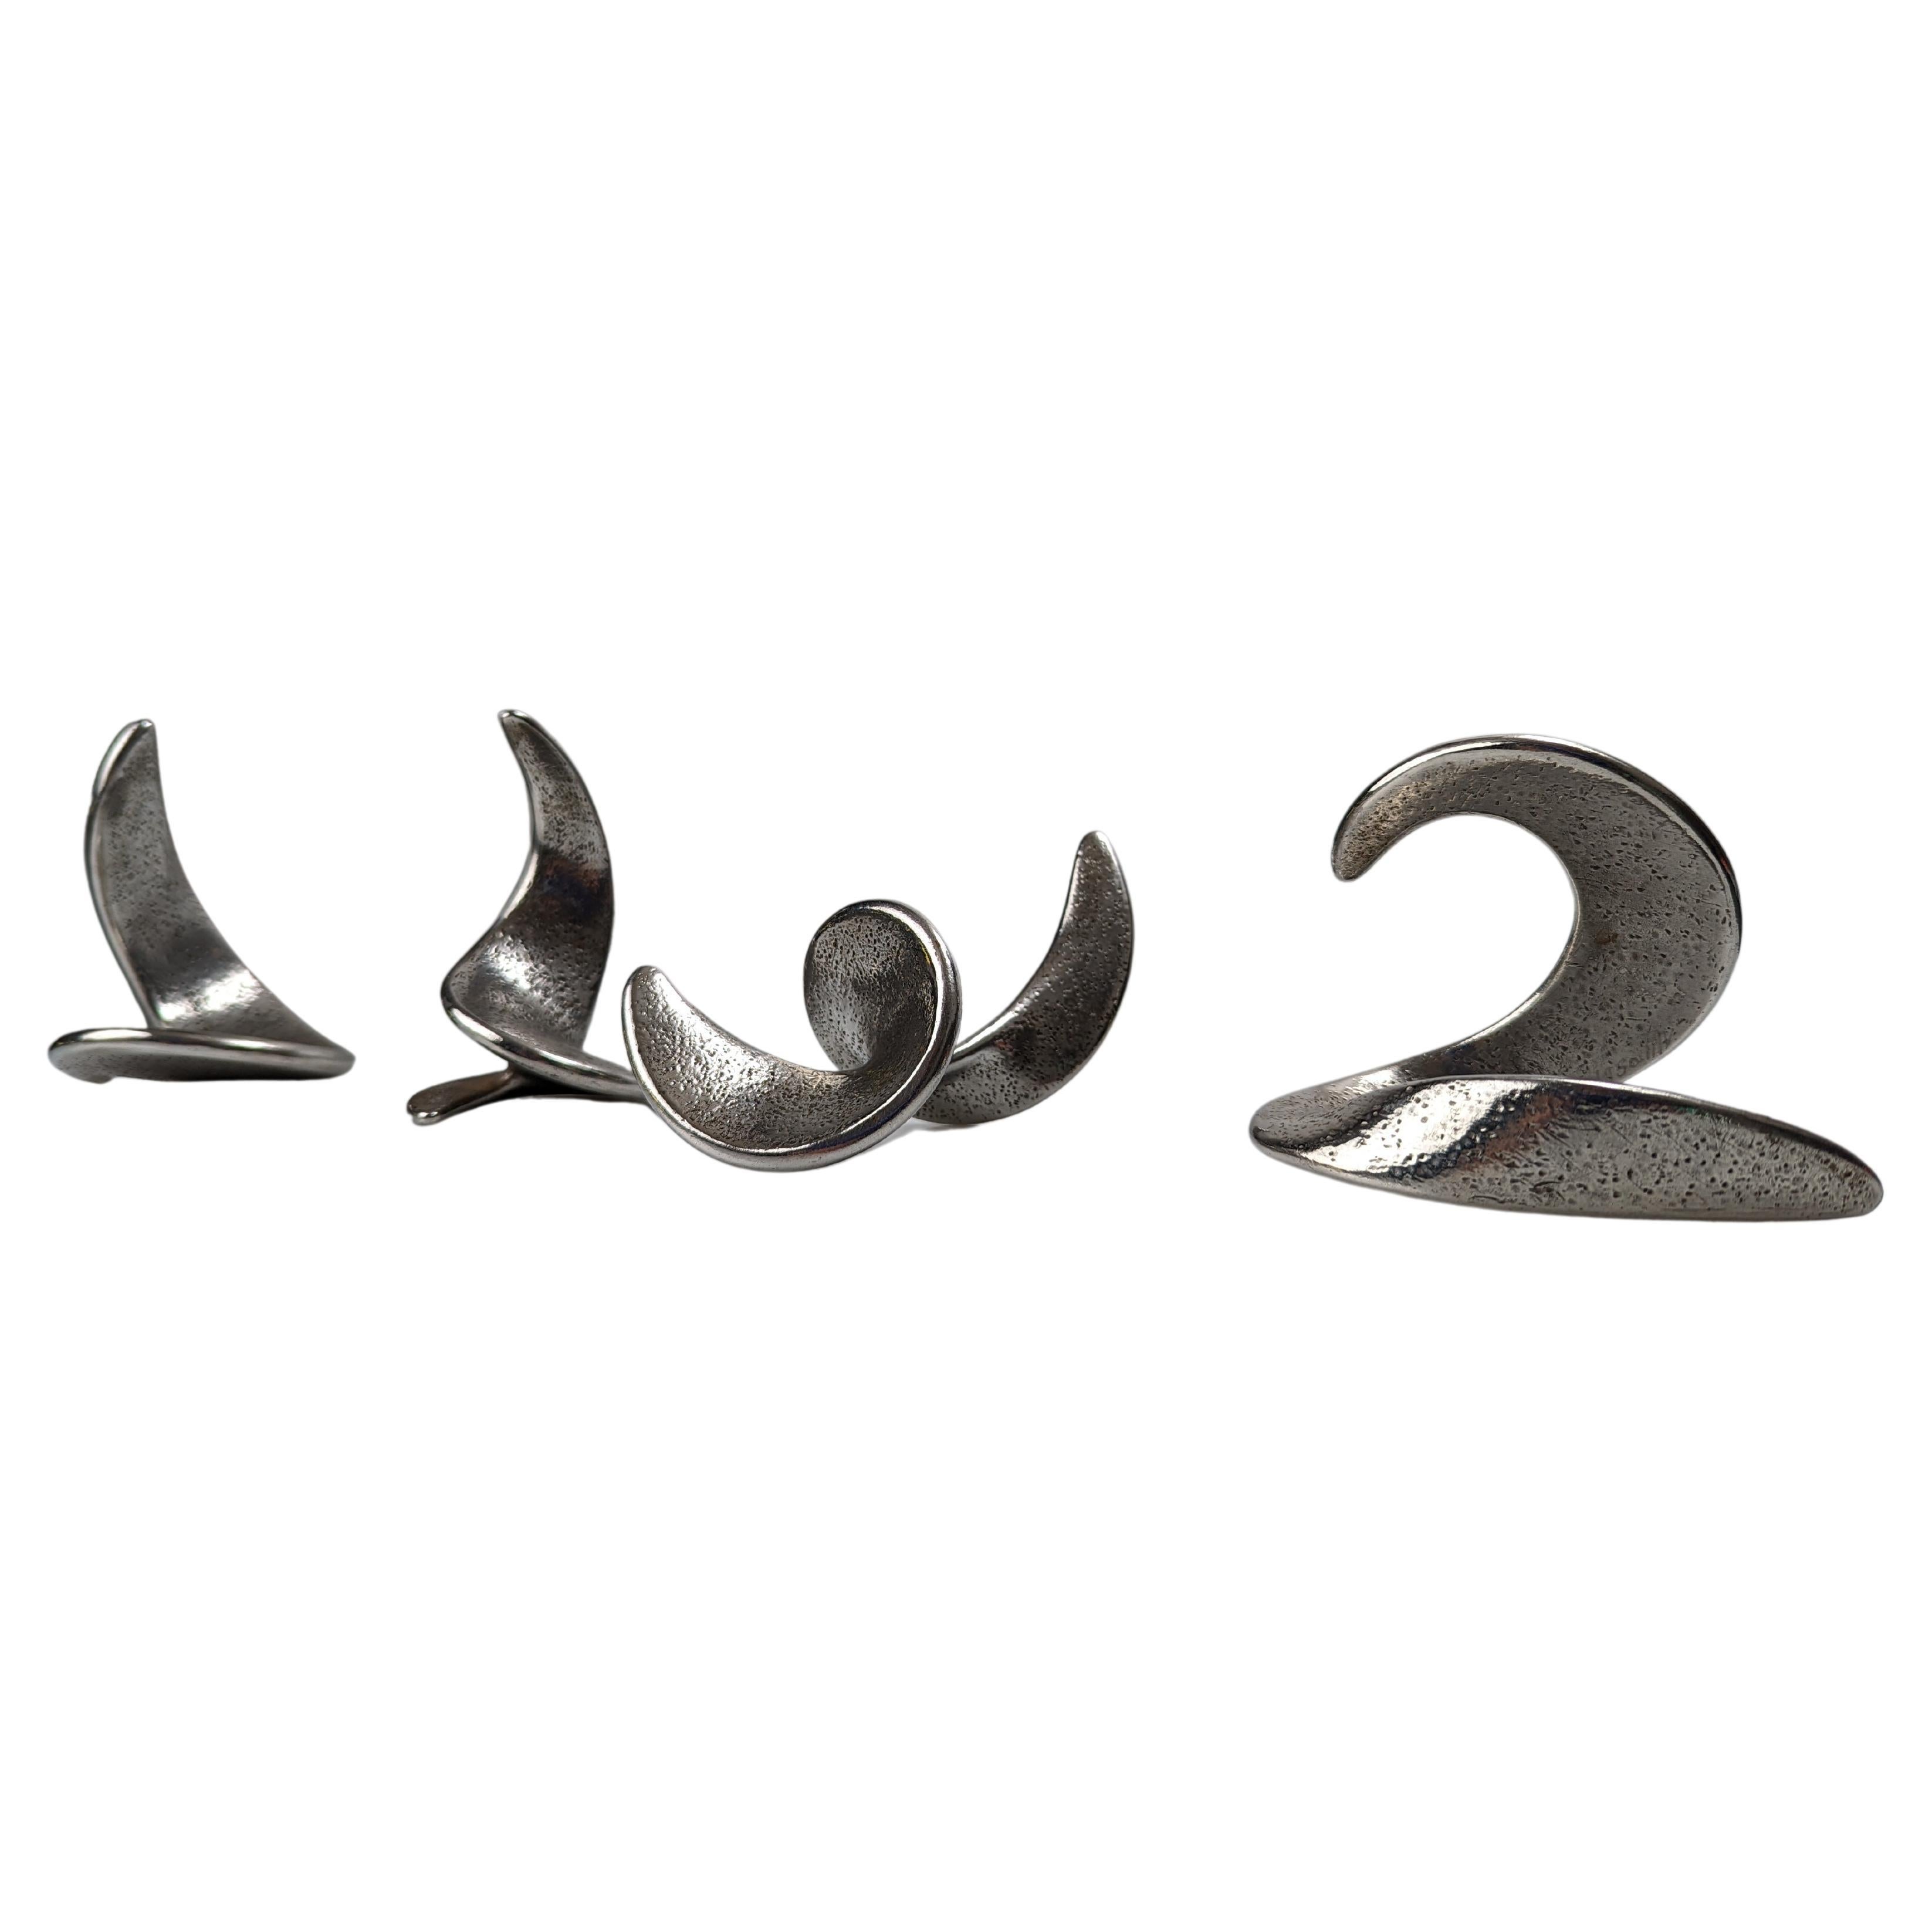 Set of Spiral Sculptures in Steel Signed by the Artist, 1980s For Sale